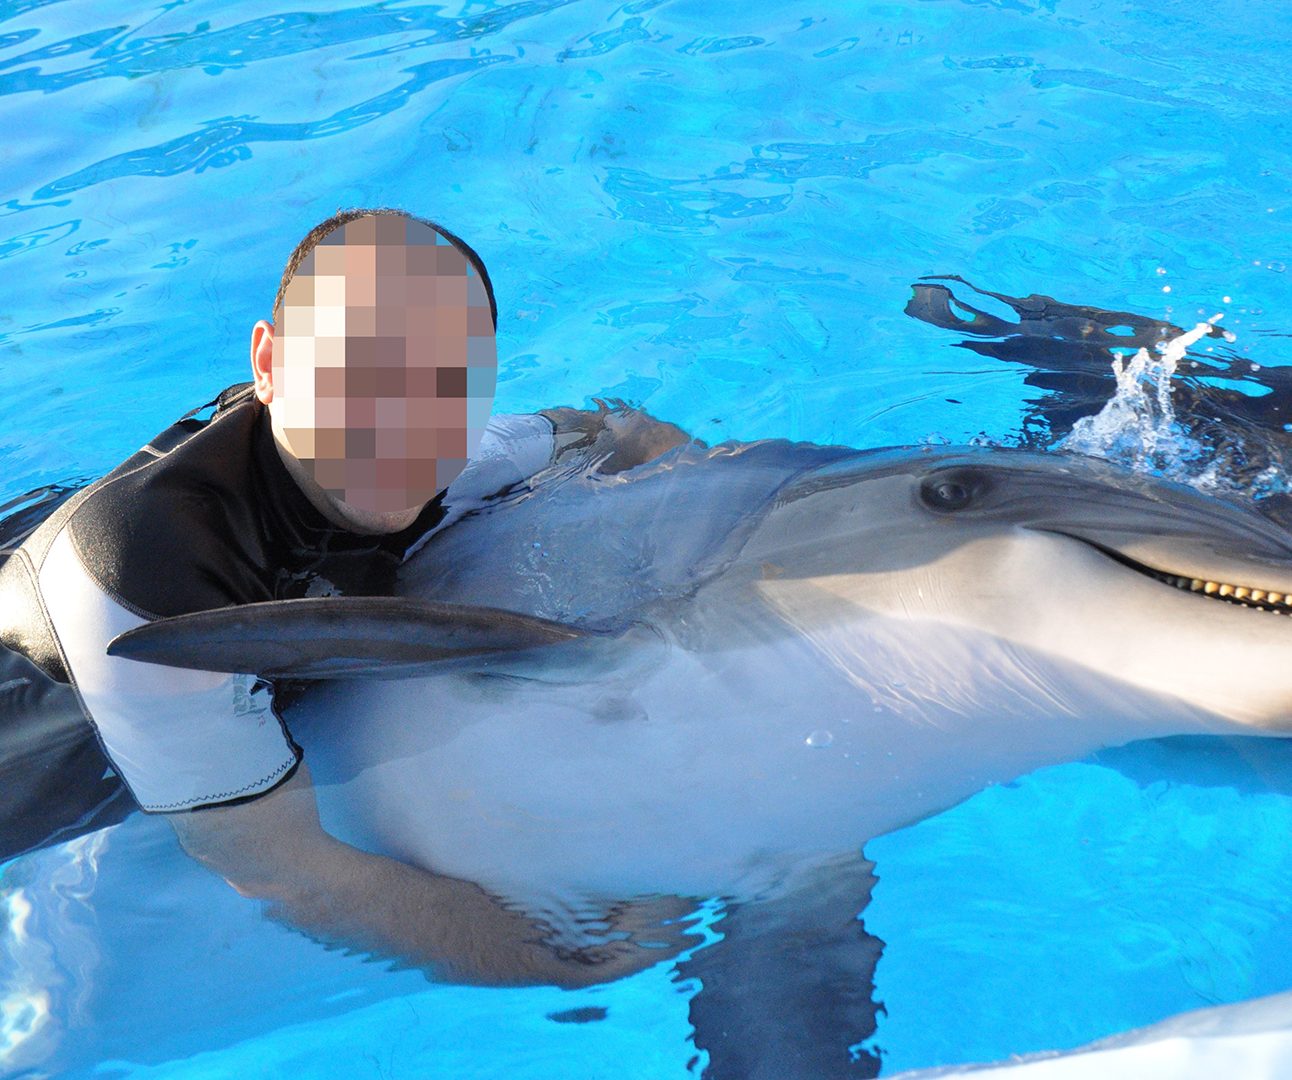 A man in a swimming pool cradling a captive dolphin.